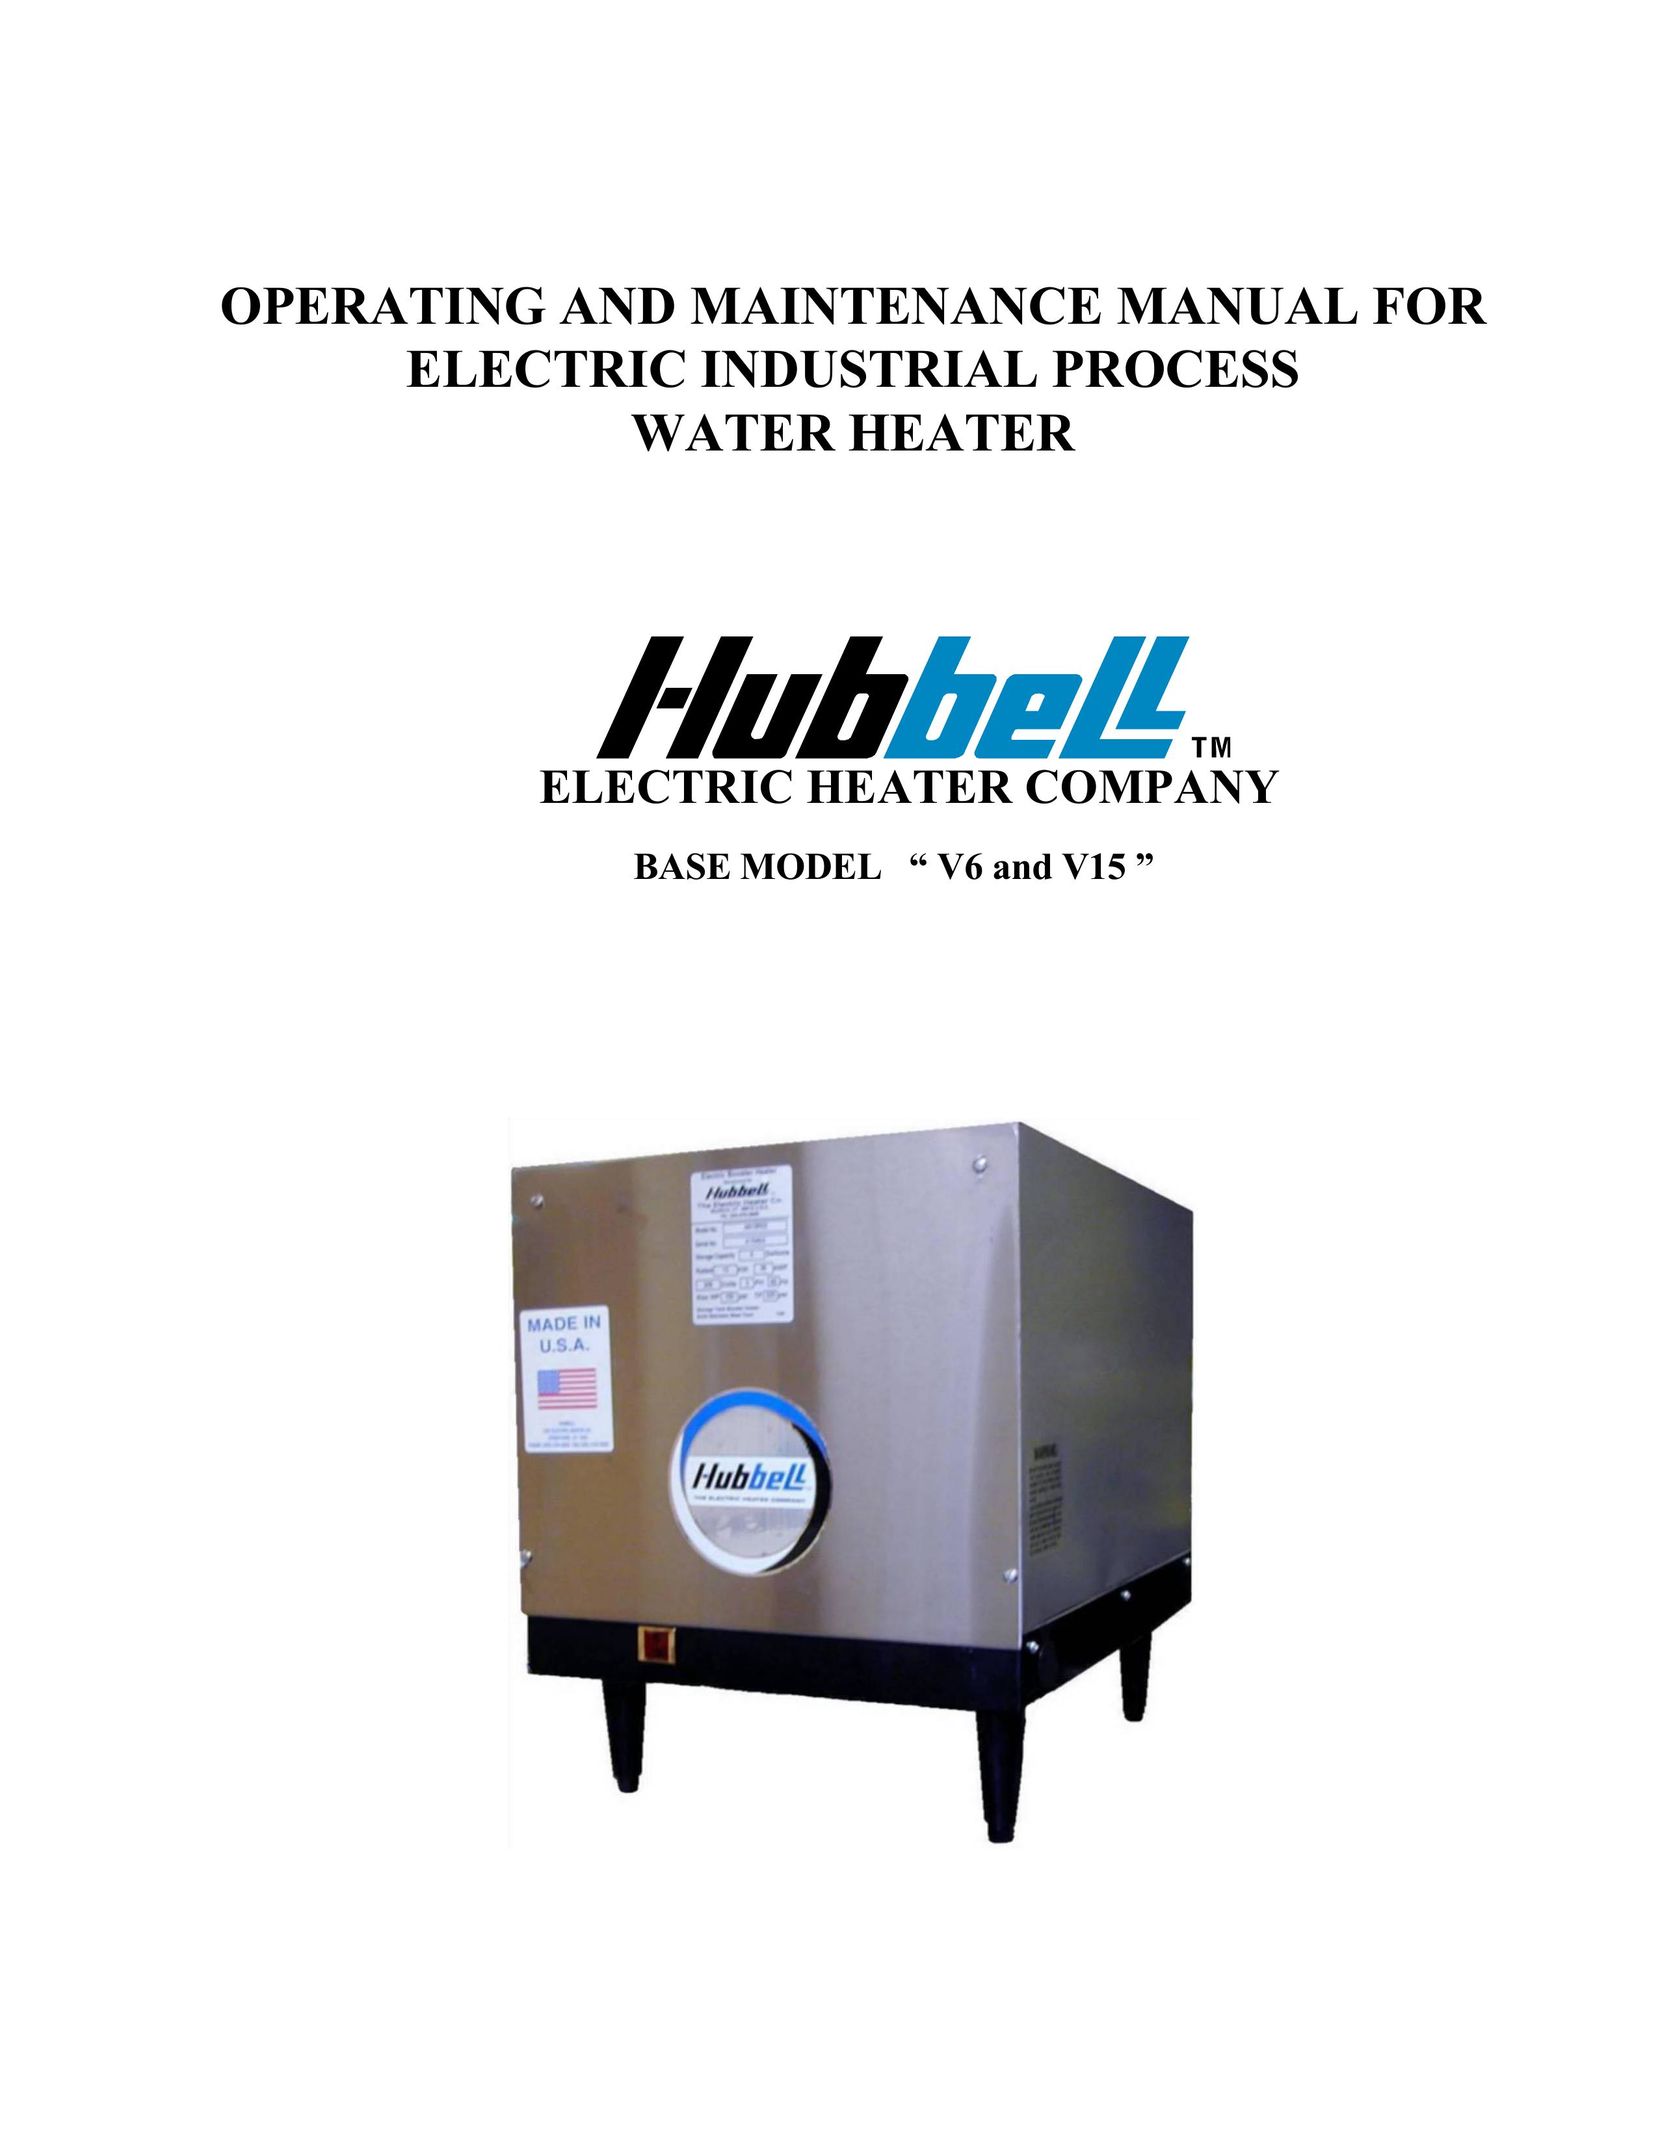 Hubbell Electric Heater Company V6 Water Heater User Manual